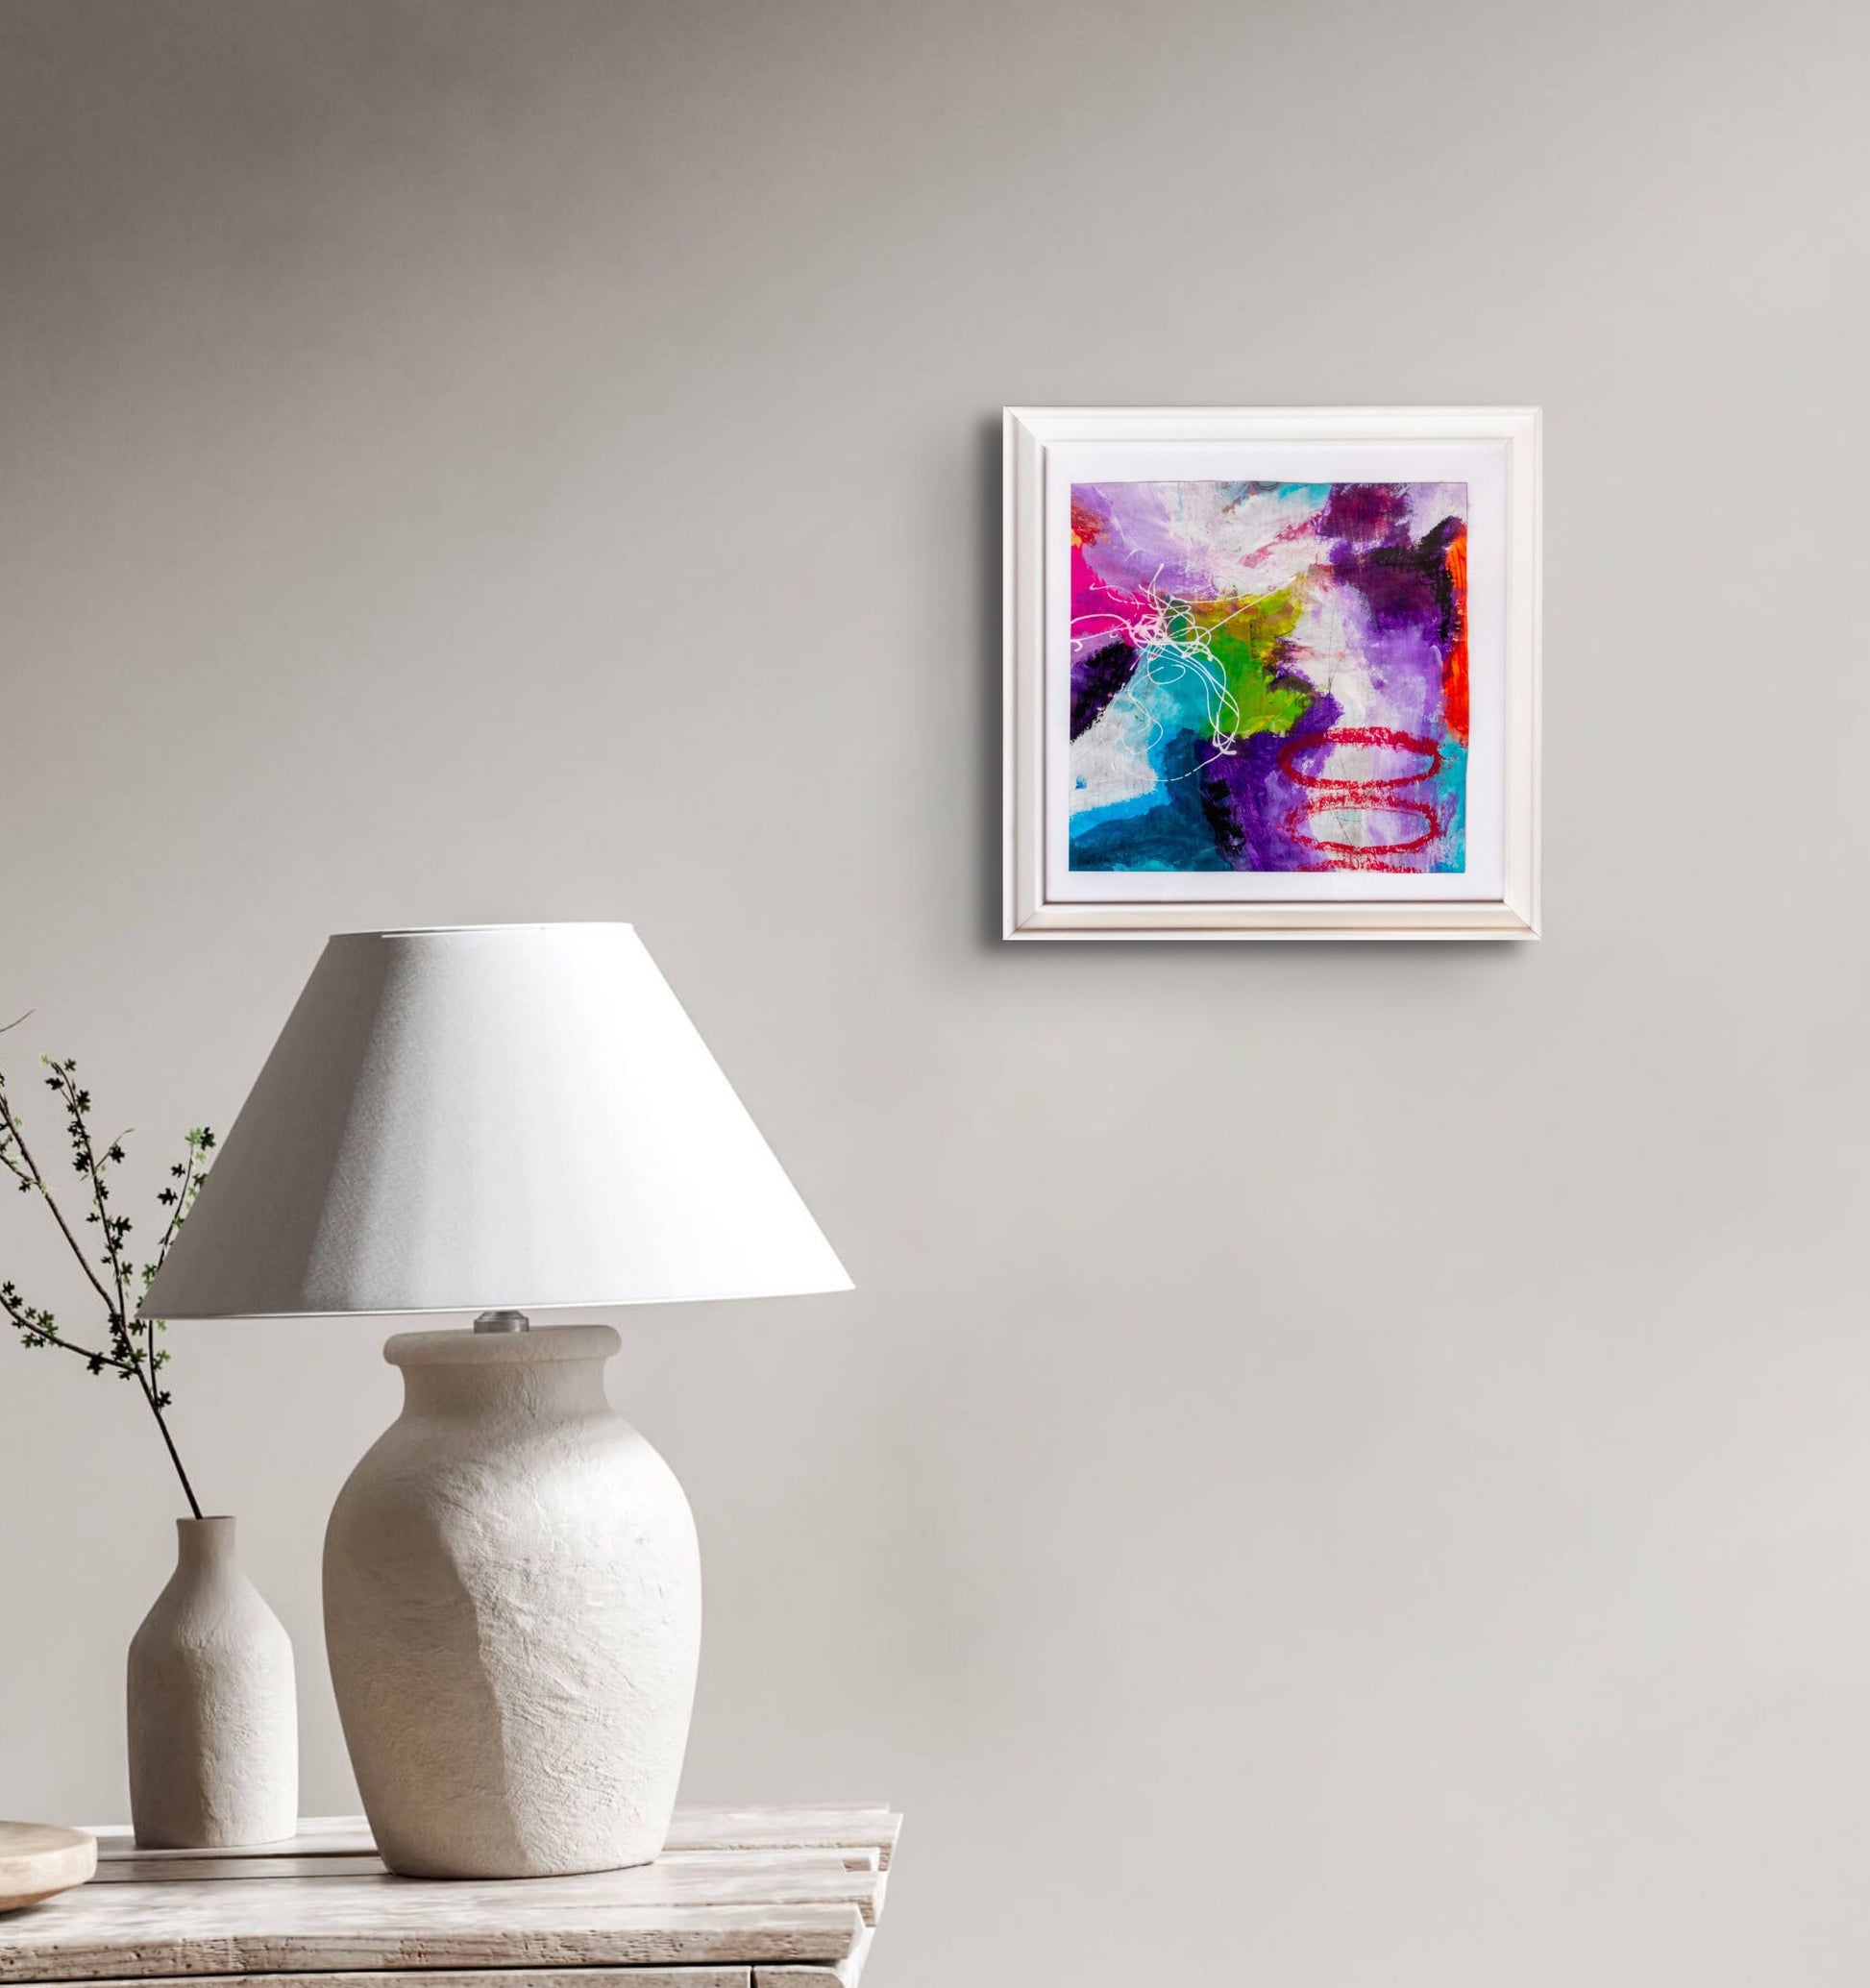 Colorful acrylic abstract painting on paper titled 'Part of the Whole #11' by artist Steffi Möllers; measures app 7.5"x7.5"; w/frame measures app 10"x10"; image shown in situ hanging on wall.